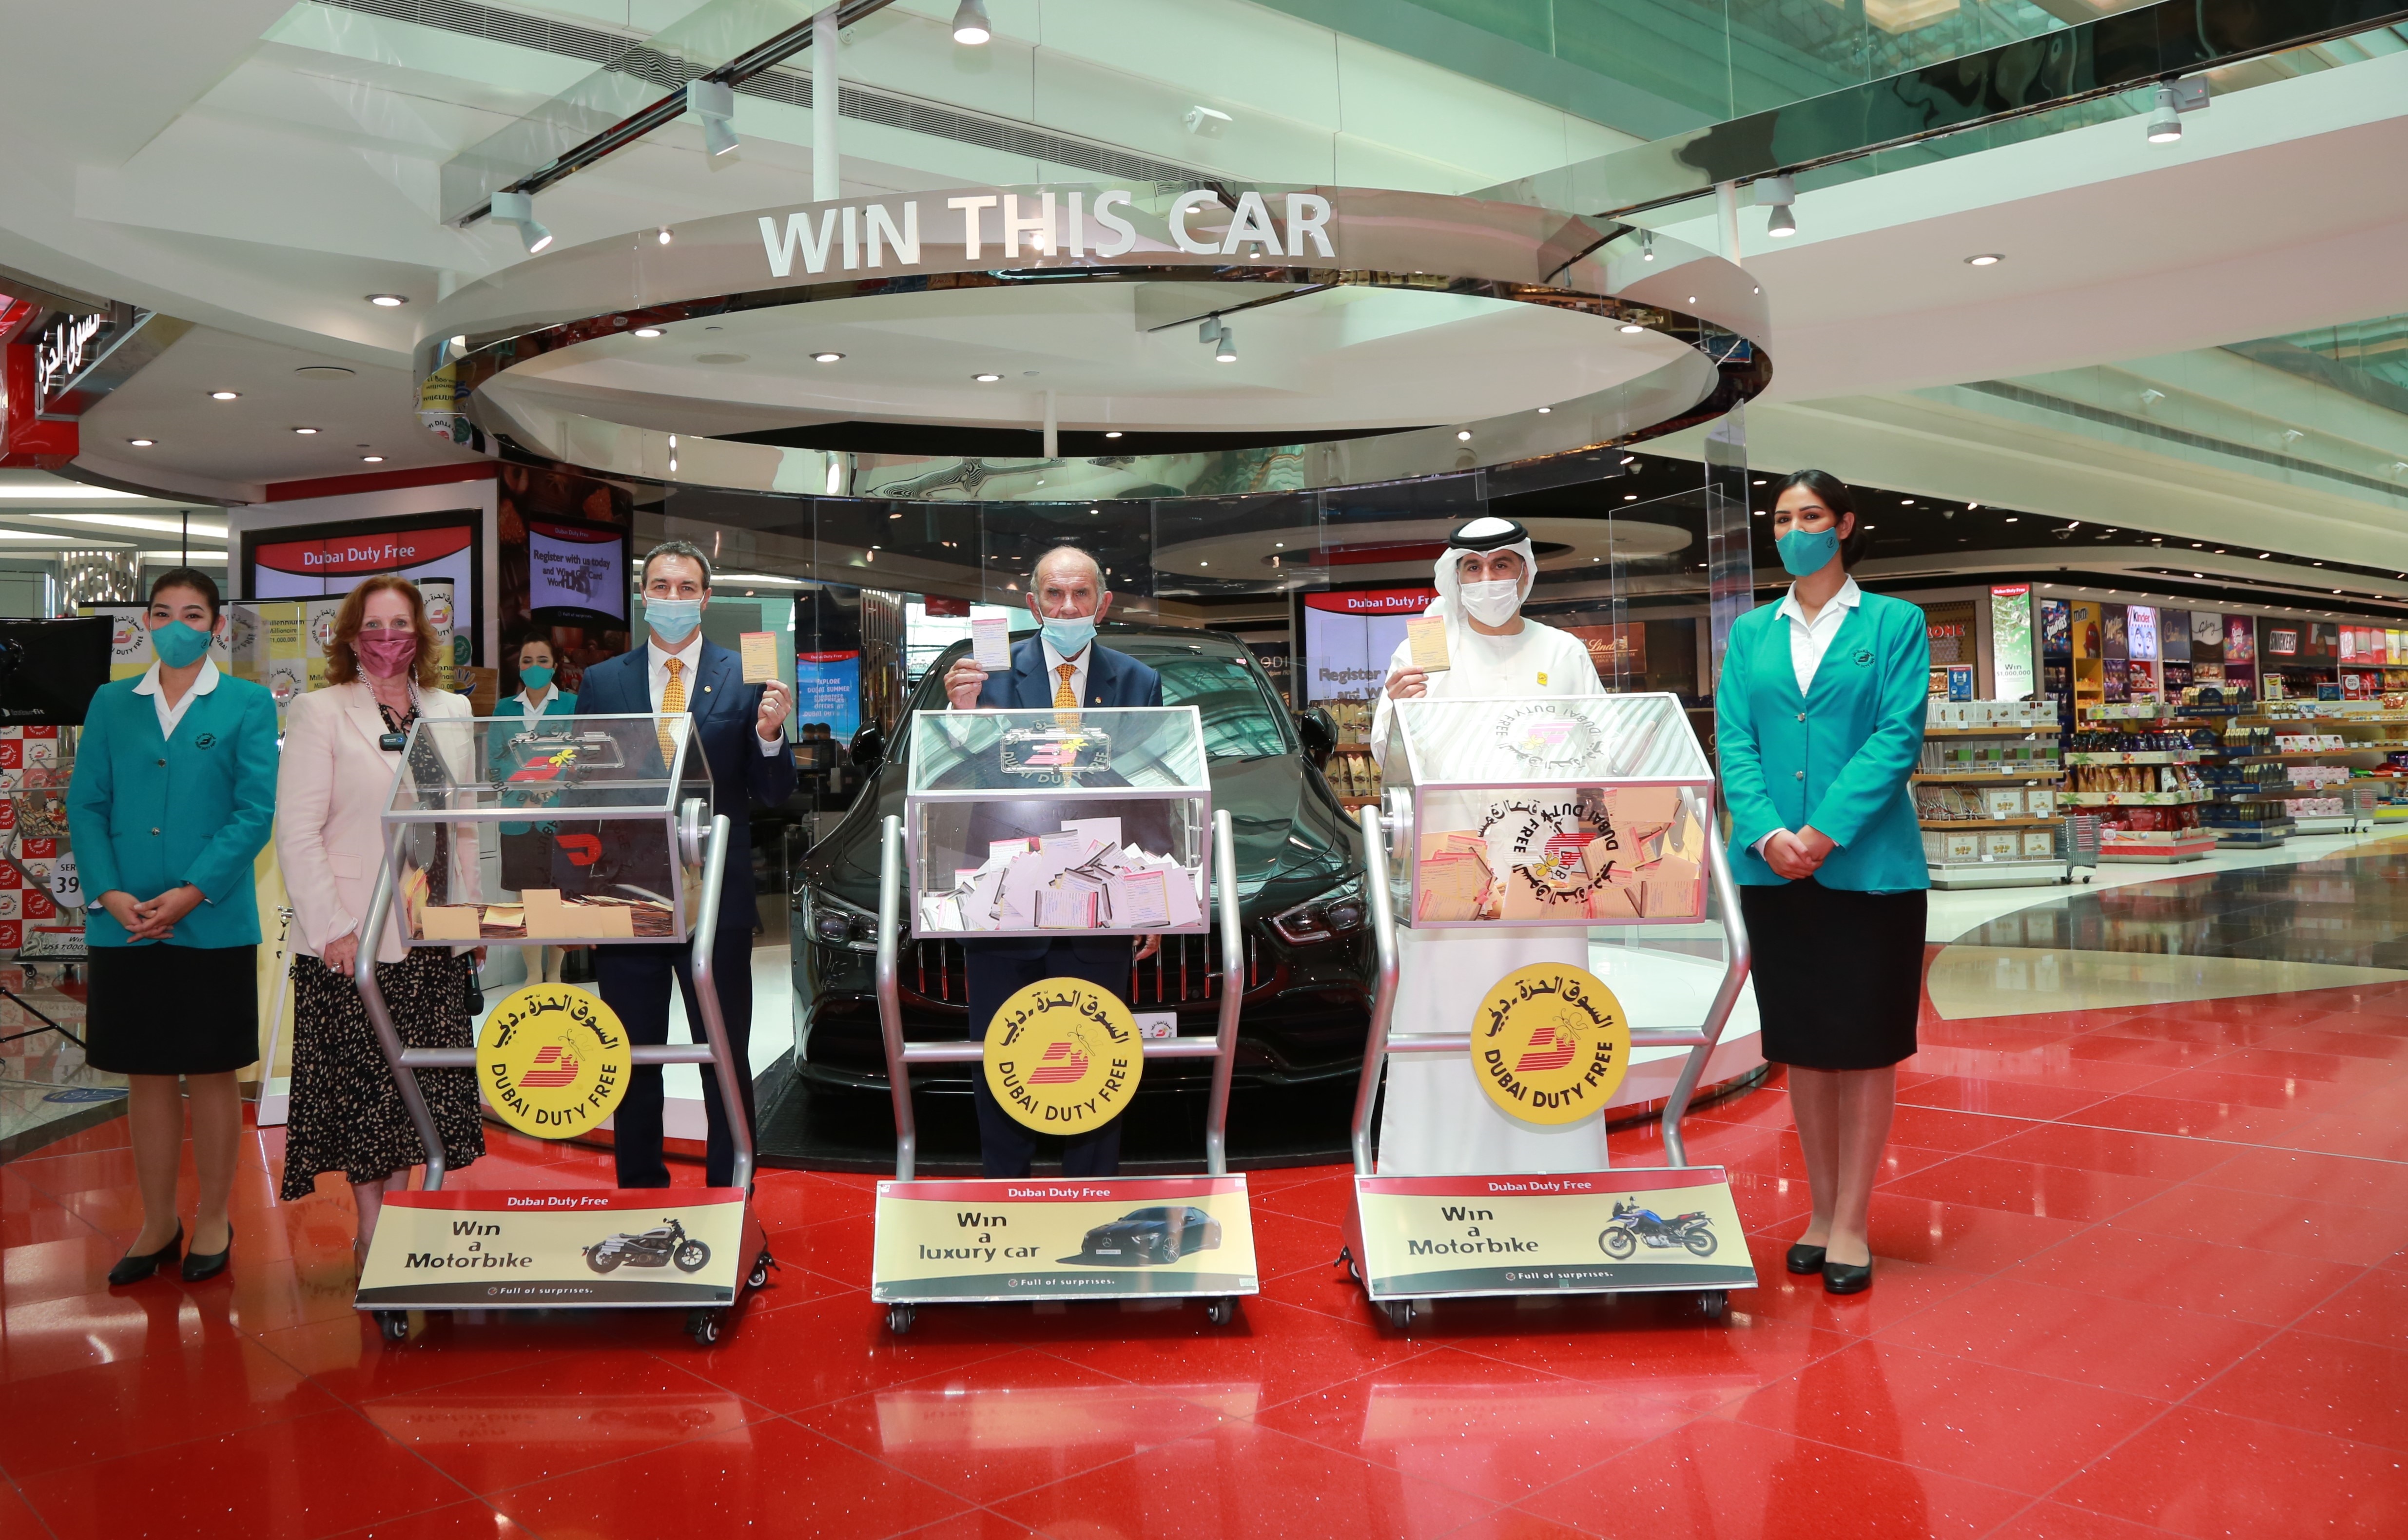 The Dubai Duty Free officials conducted the Dubai Duty Free Finest Surprise draw for one car and two motorbikes.